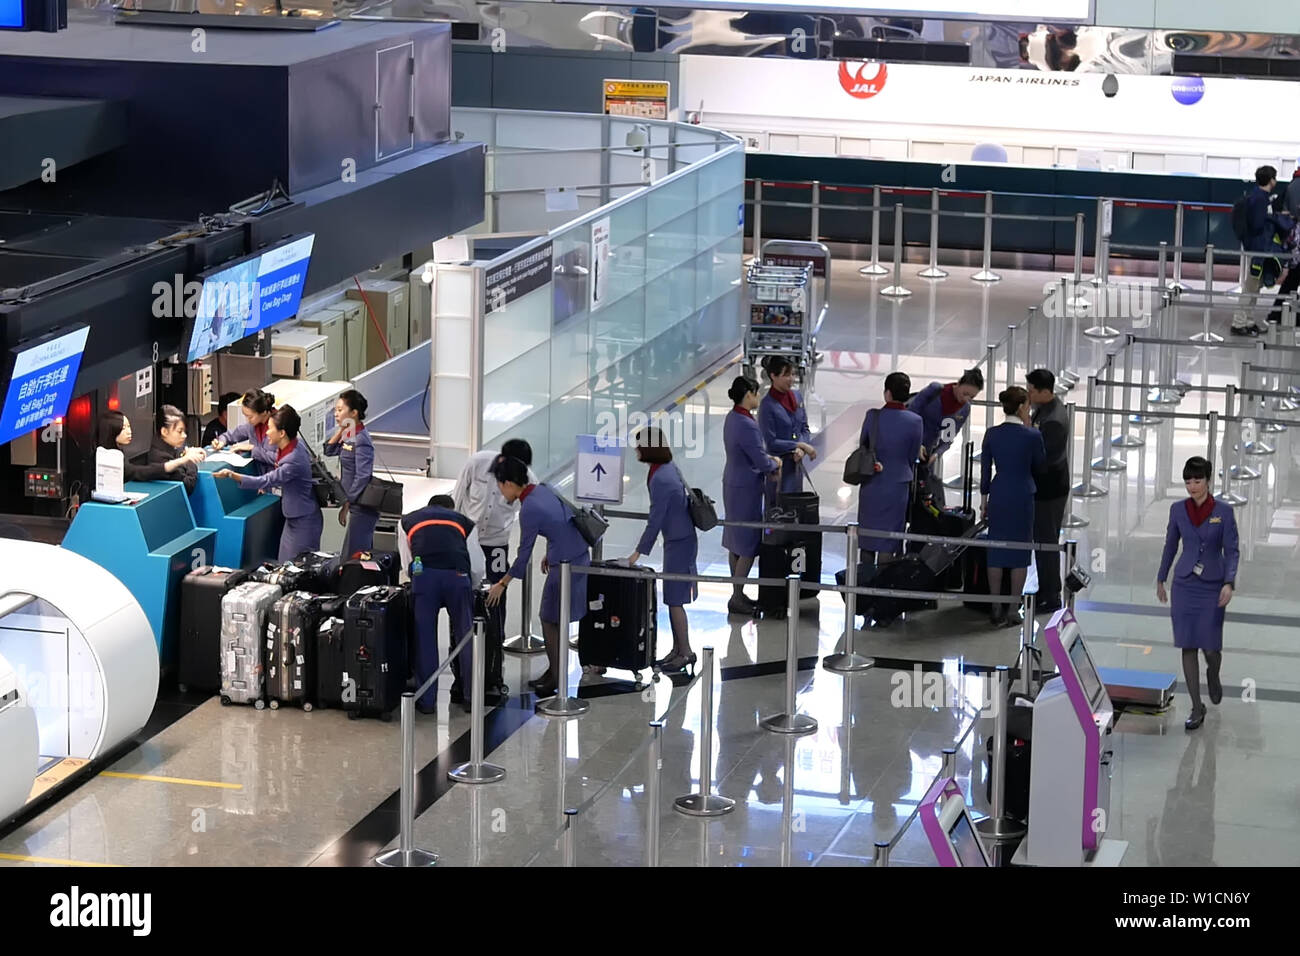 Top shot of passengers going to the China airline check in desks inside Taiwan airport Stock Photo